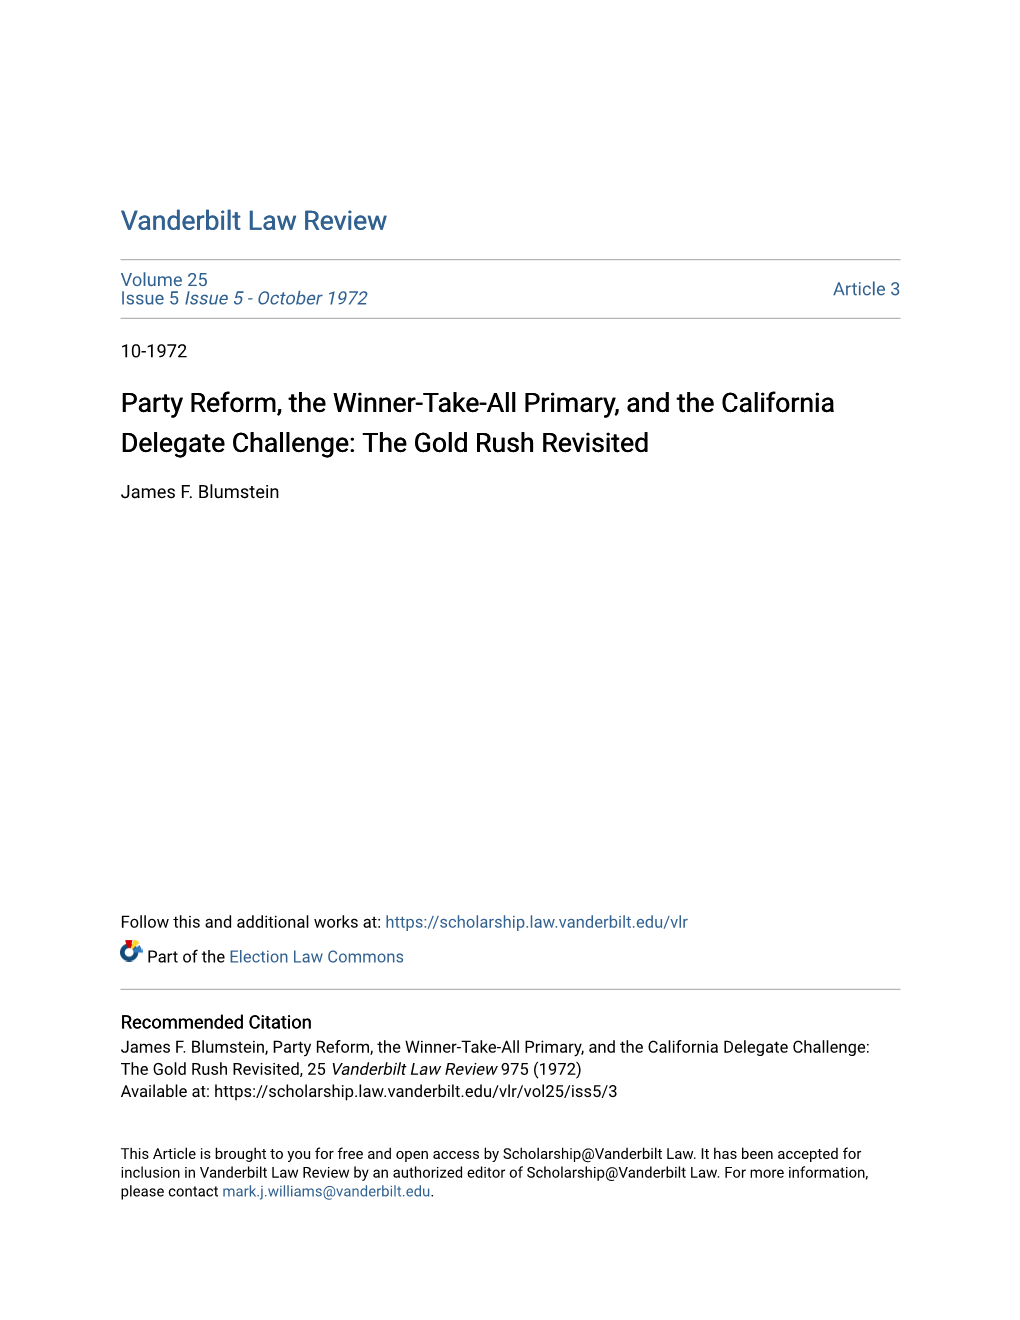 Party Reform, the Winner-Take-All Primary, and the California Delegate Challenge: the Gold Rush Revisited